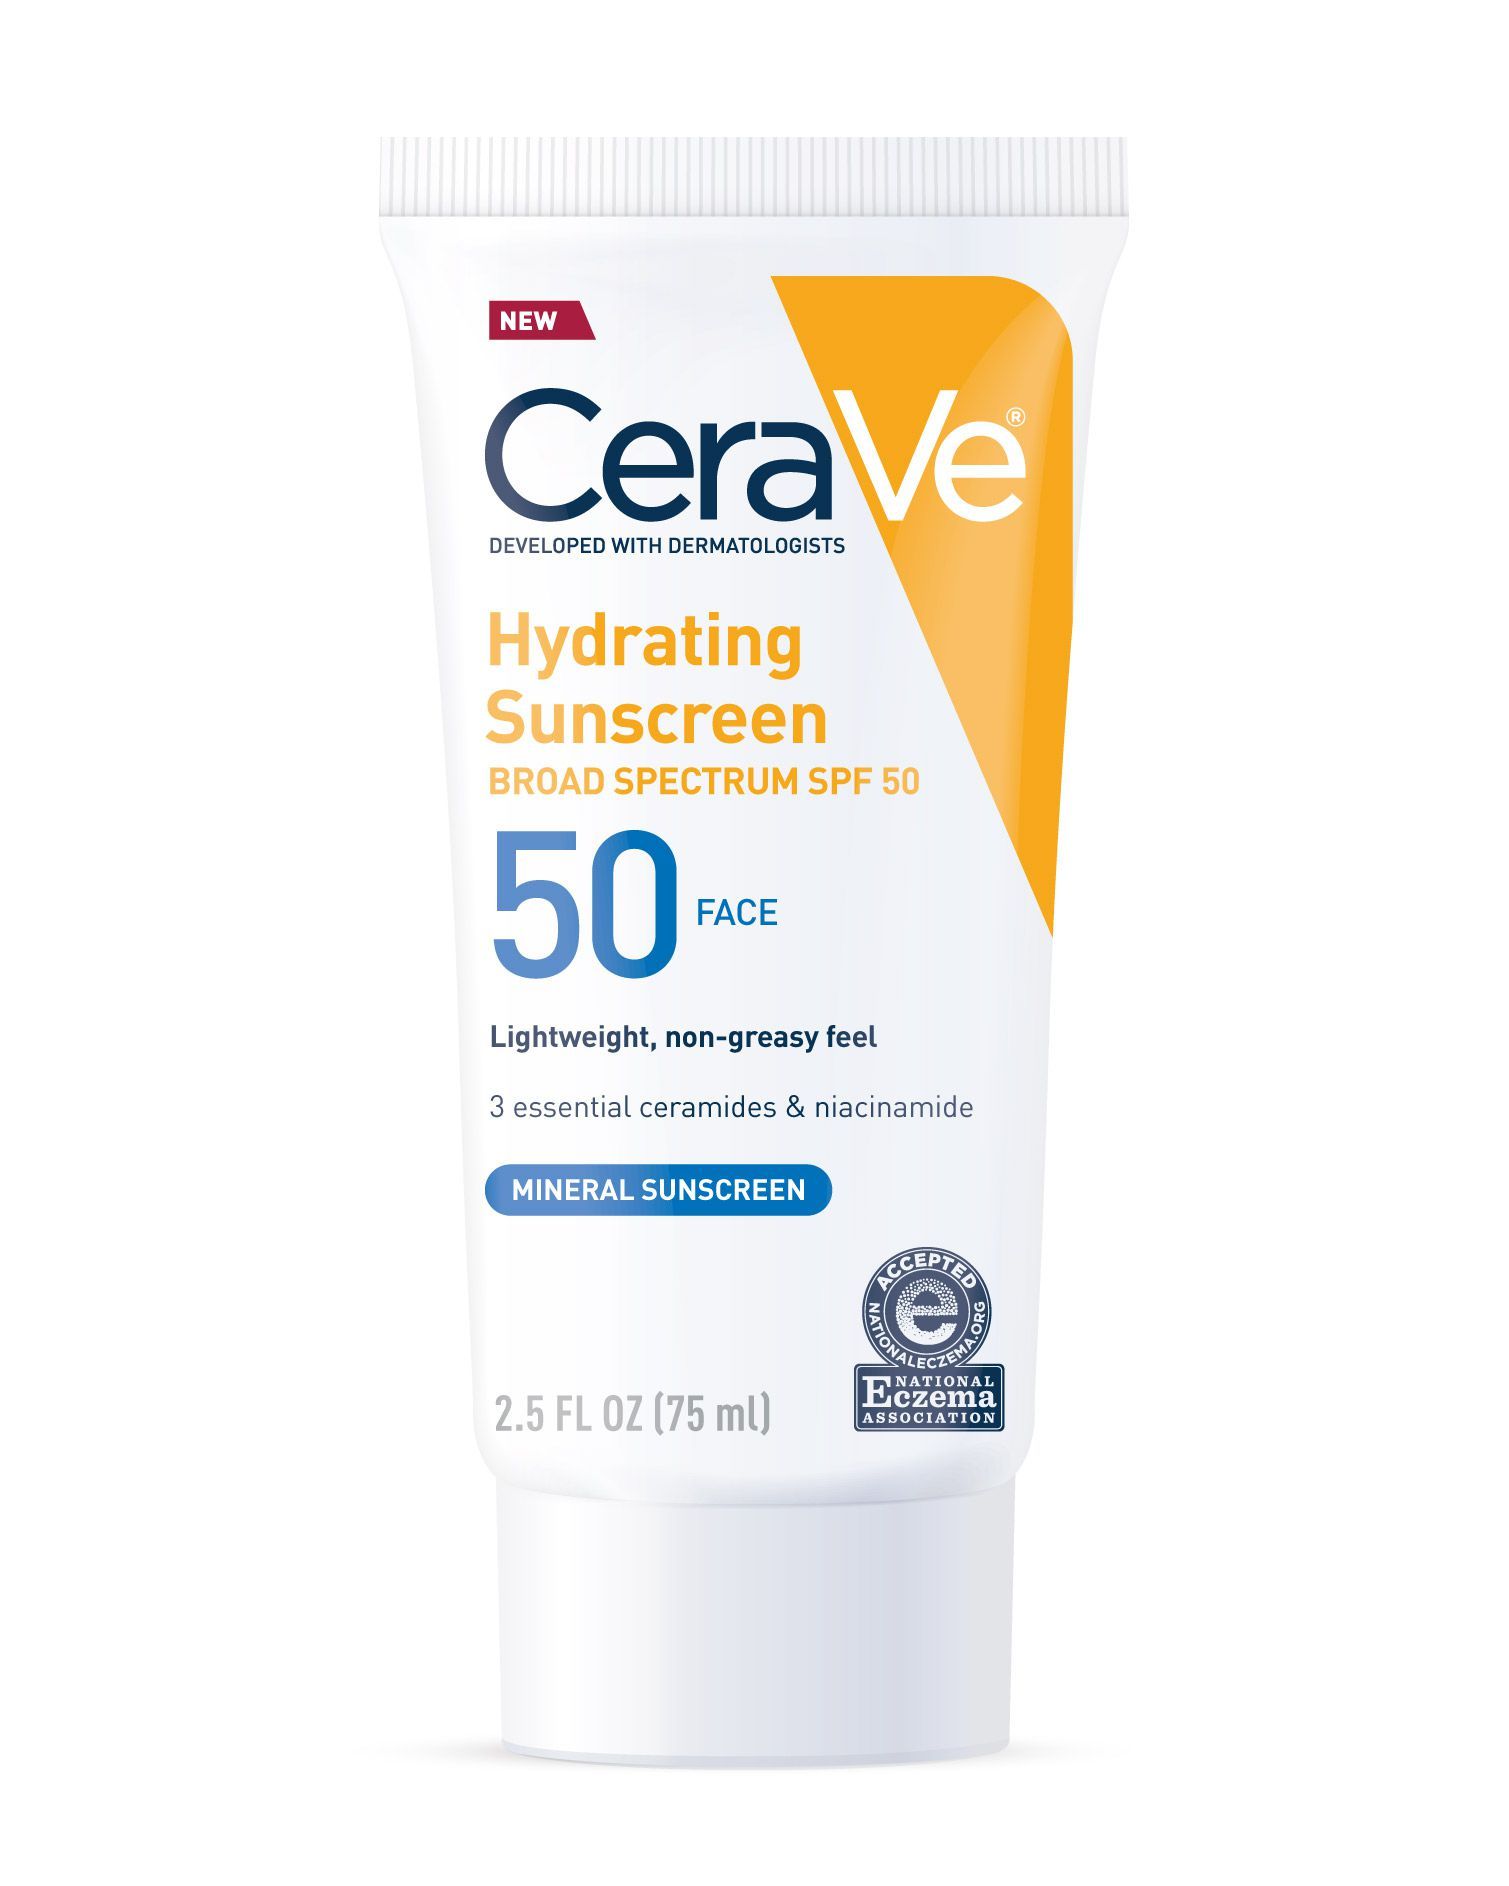 CeraVe Hydrating Sunscreen SPF 50 Face